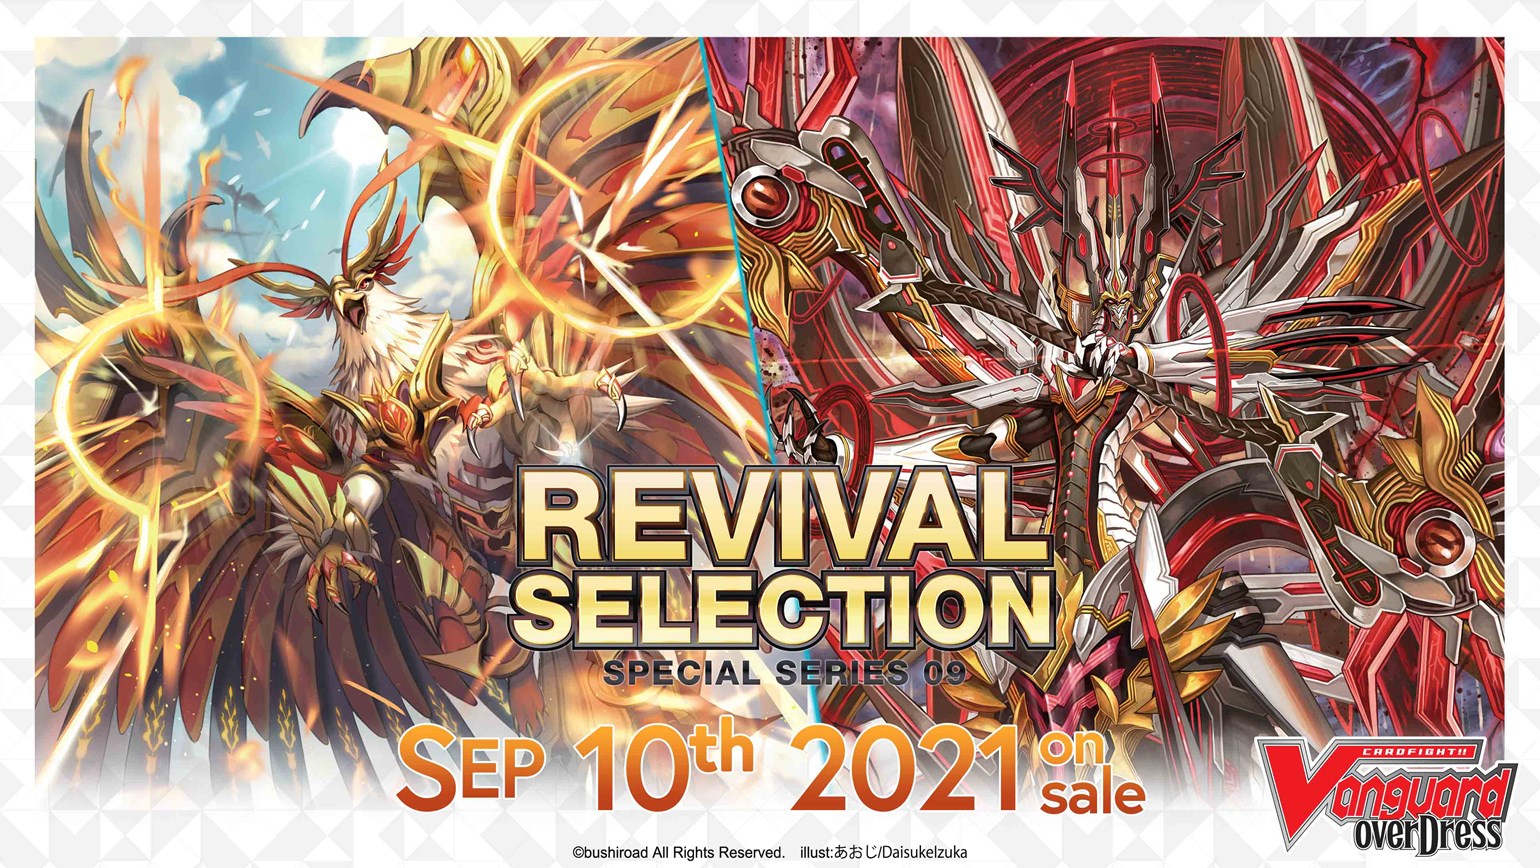 English Edition Special Series 09 “Revival Selection,” Coming to Stores on September 10th!